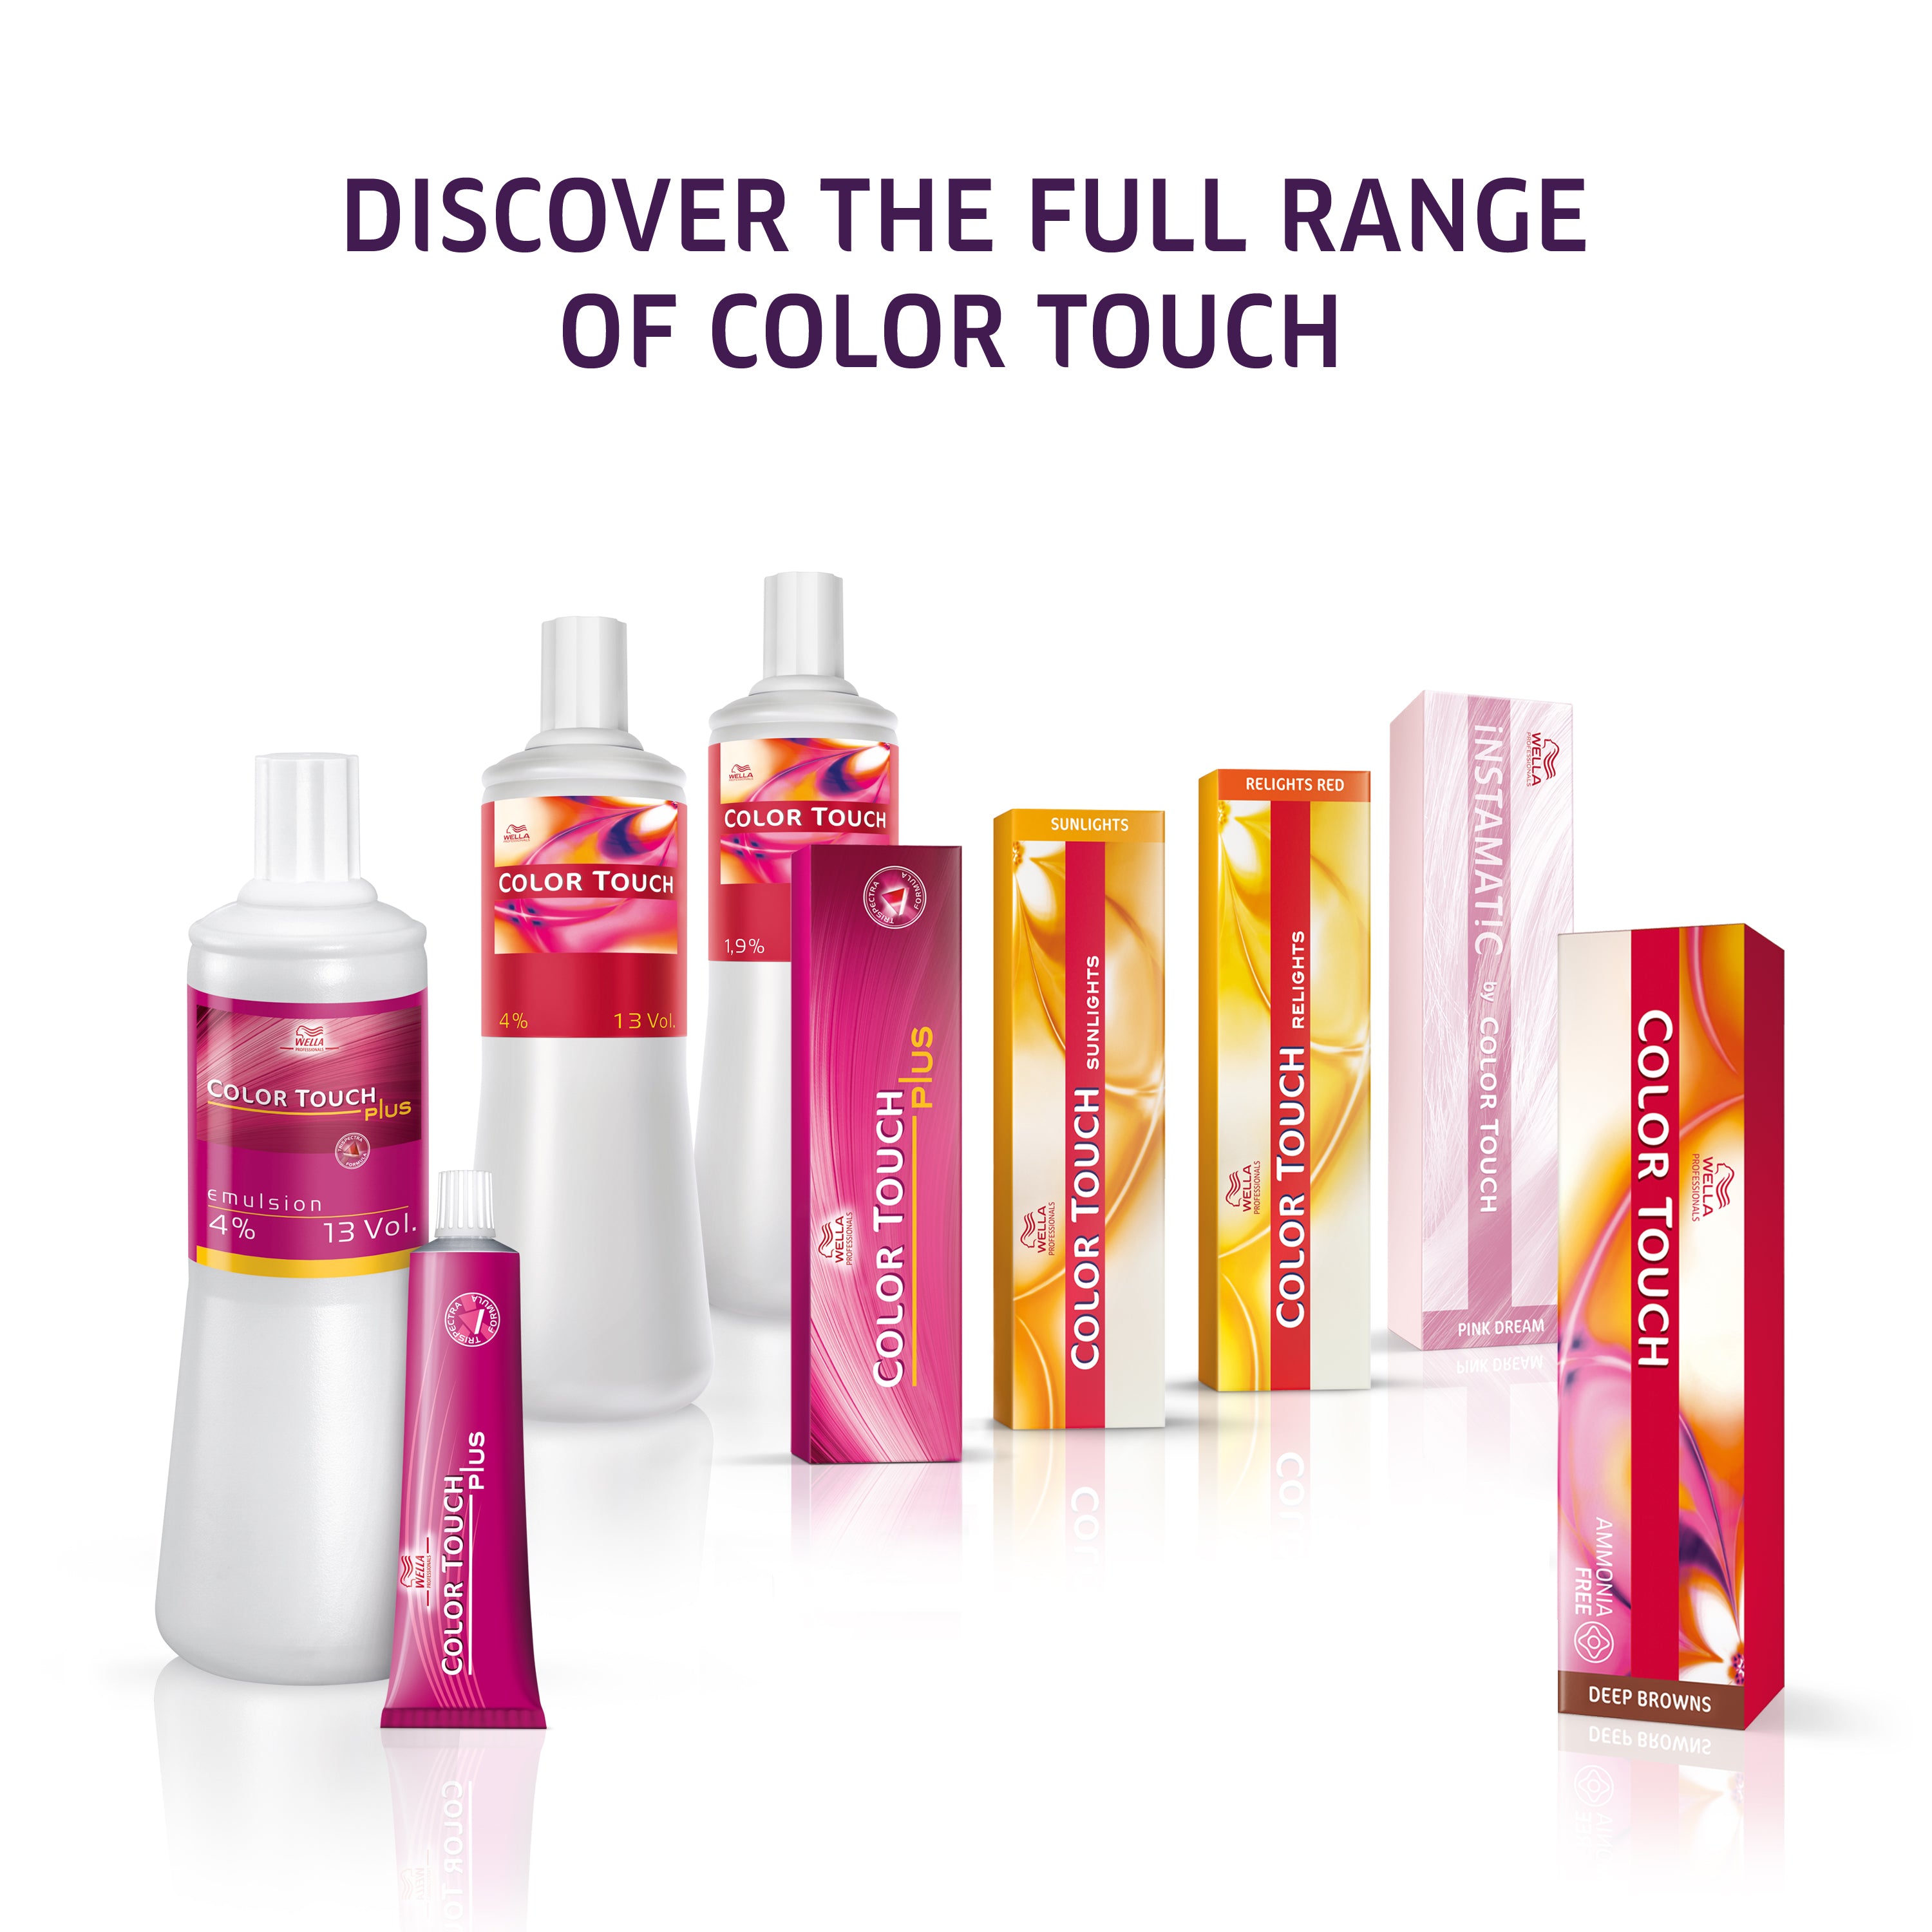 Wella Professional Color Touch Emulsion 4 % 60 ml